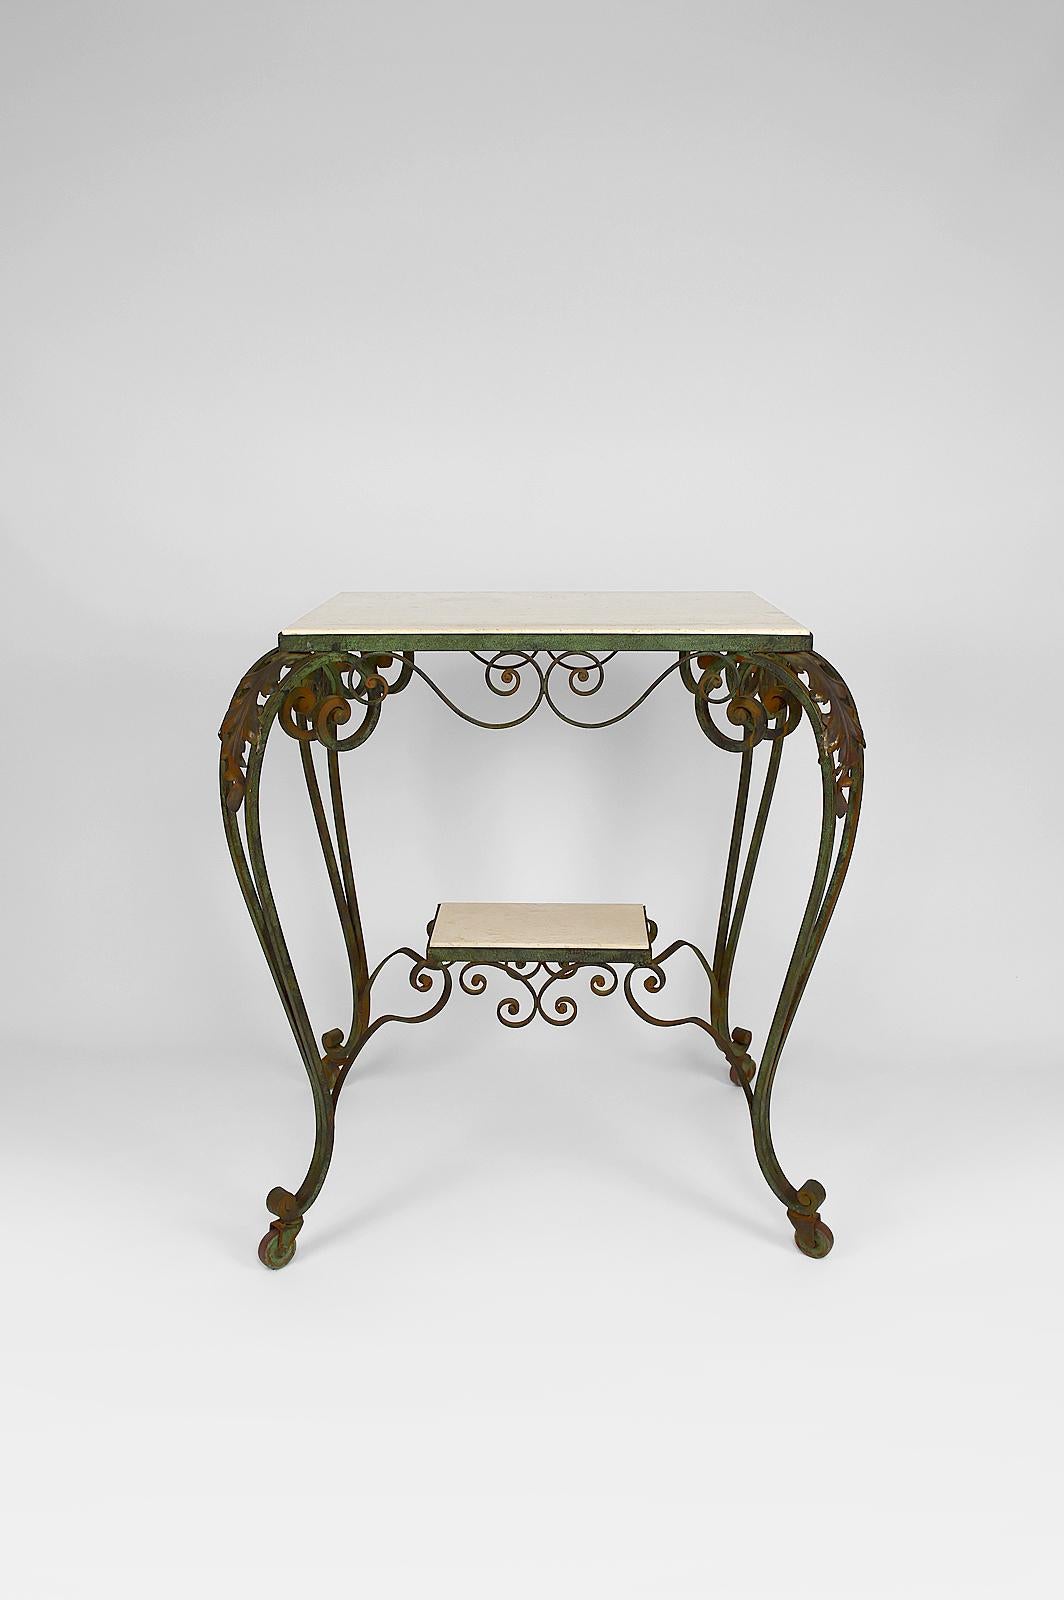 Superb service trolley / gueridon / side table / rolling bar for winter garden or veranda.
Wrought iron structure with green patina. Trays in white marble stone (travertine). 4 wheels.

Art Deco style, France, circa 1940.

In very good